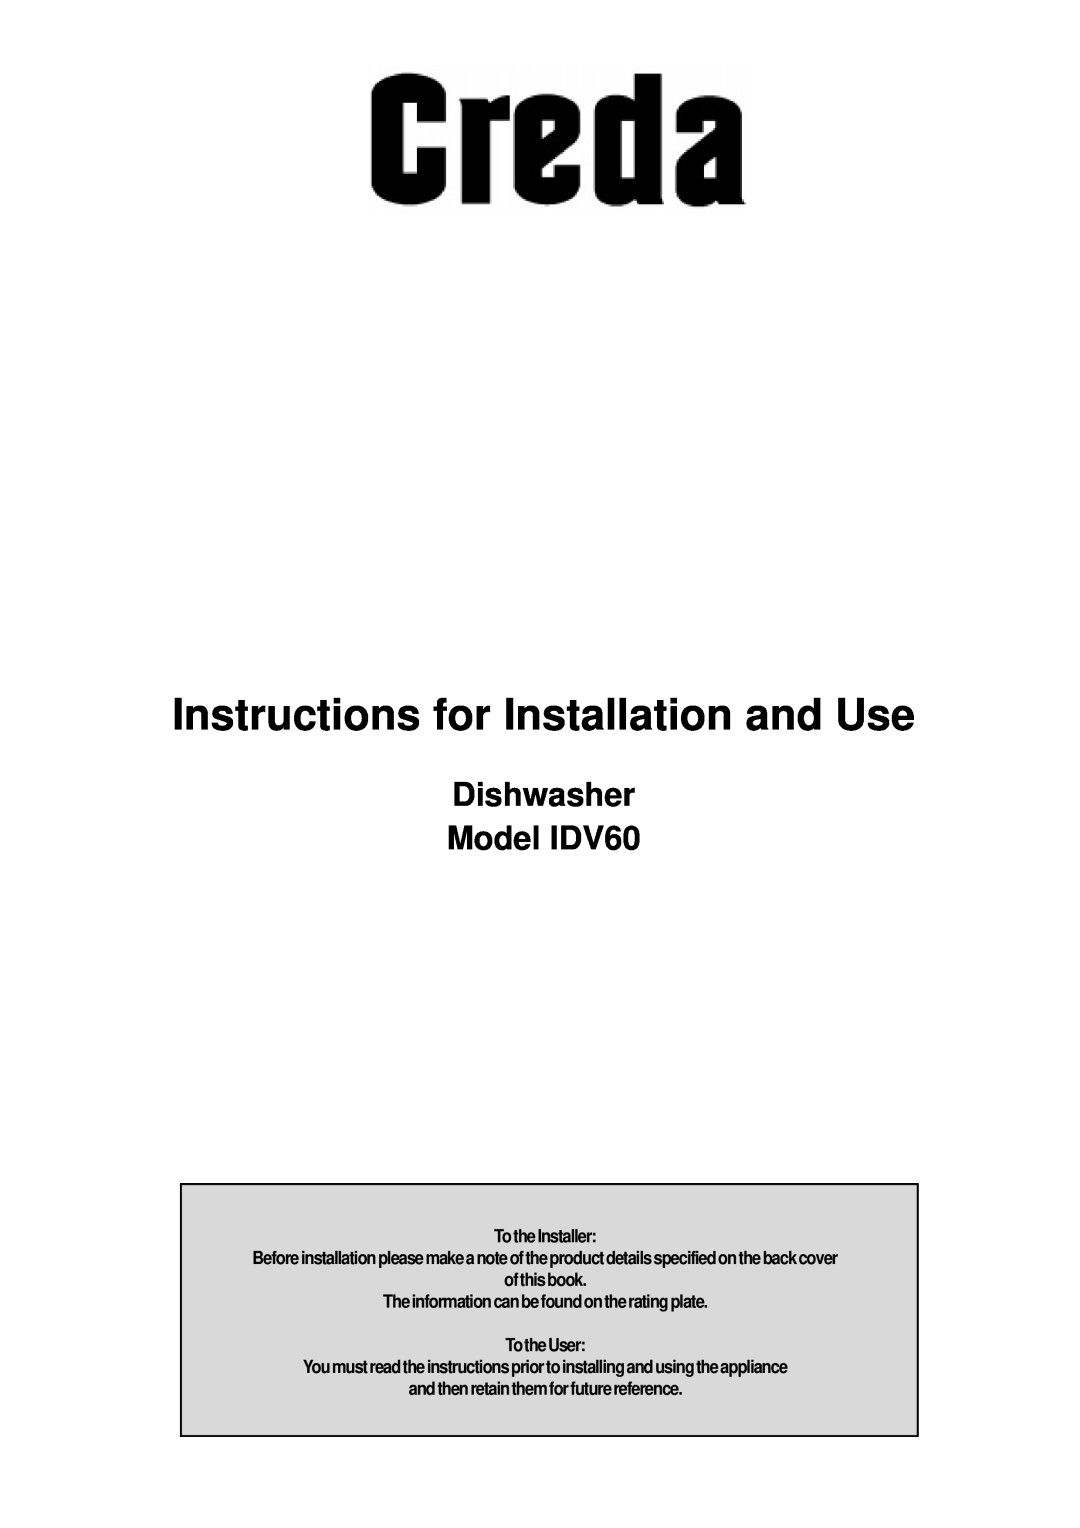 Creda manual Instructions for Installation and Use, Dishwasher Model IDV60, TotheInstaller 